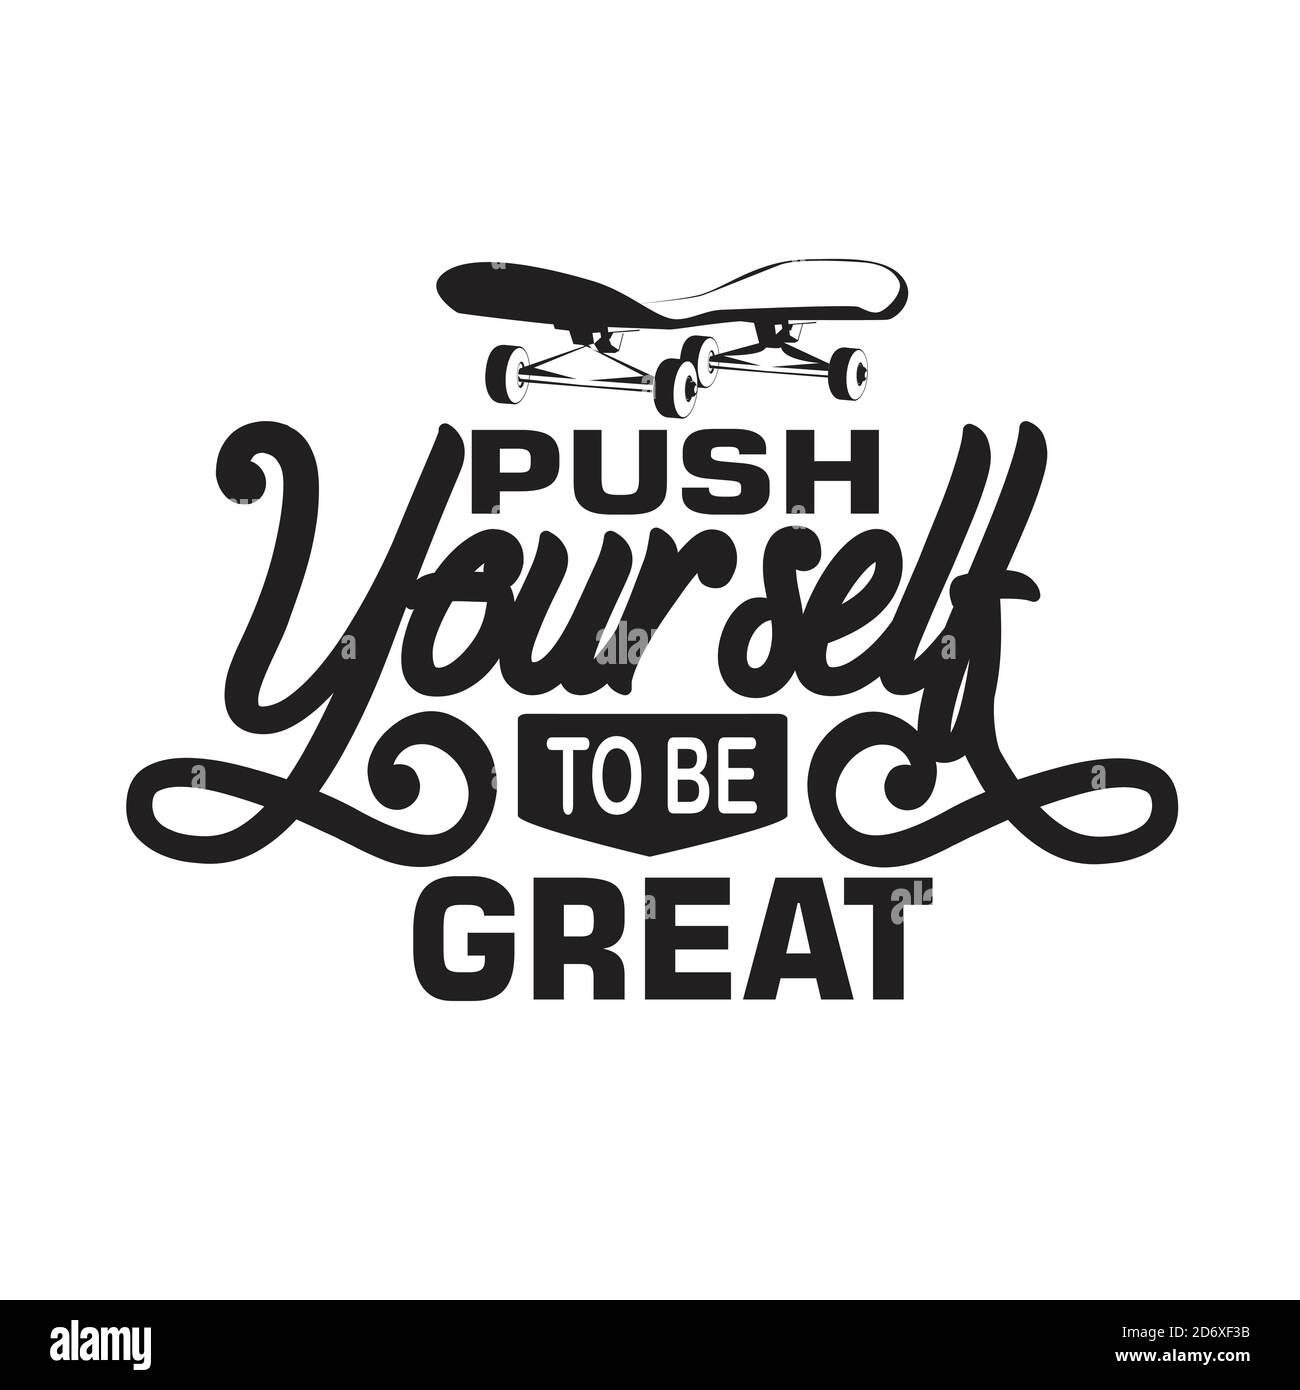 Skater Quotes and Slogan good for T-Shirt. Push Yourself to be Great. Stock Vector